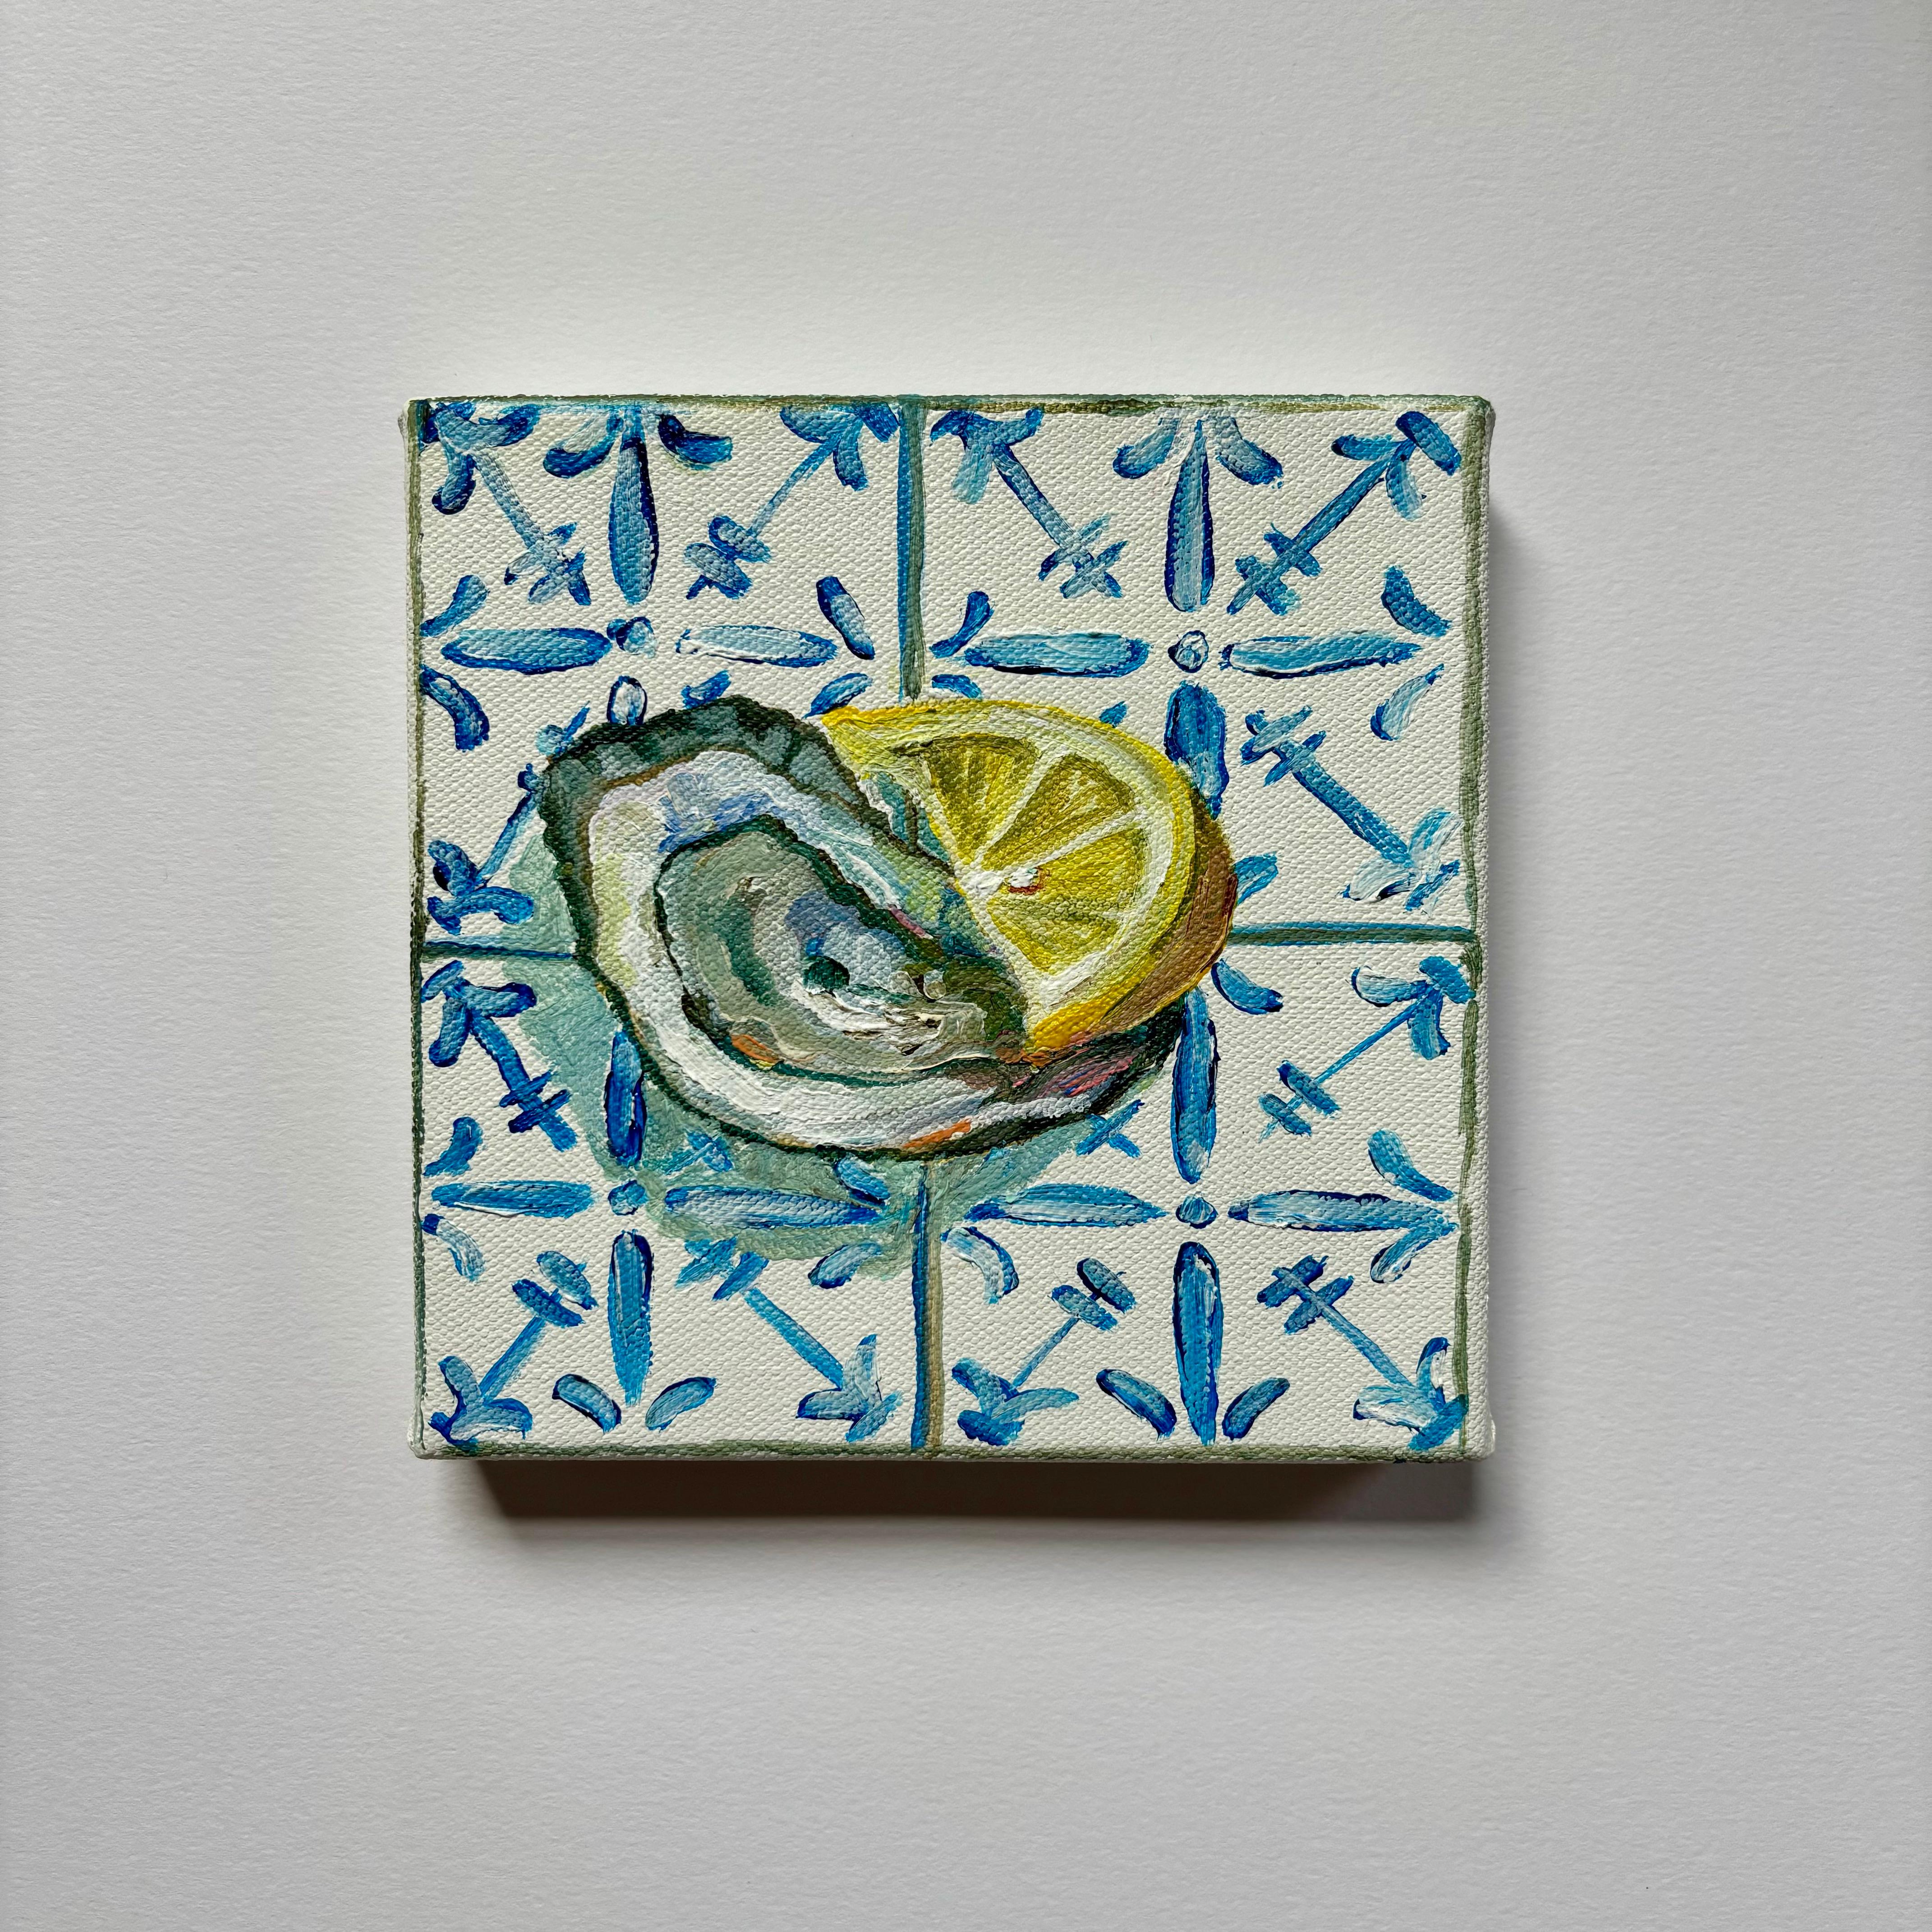 This contemporary still-life depicts a fresh and vibrant oyster with a slice of lemon on blue and white Mediterranean tiles. This box canvas is part of my MINI Tiles series, and is ready to be hung unframed. Inspired by my Abuela's home